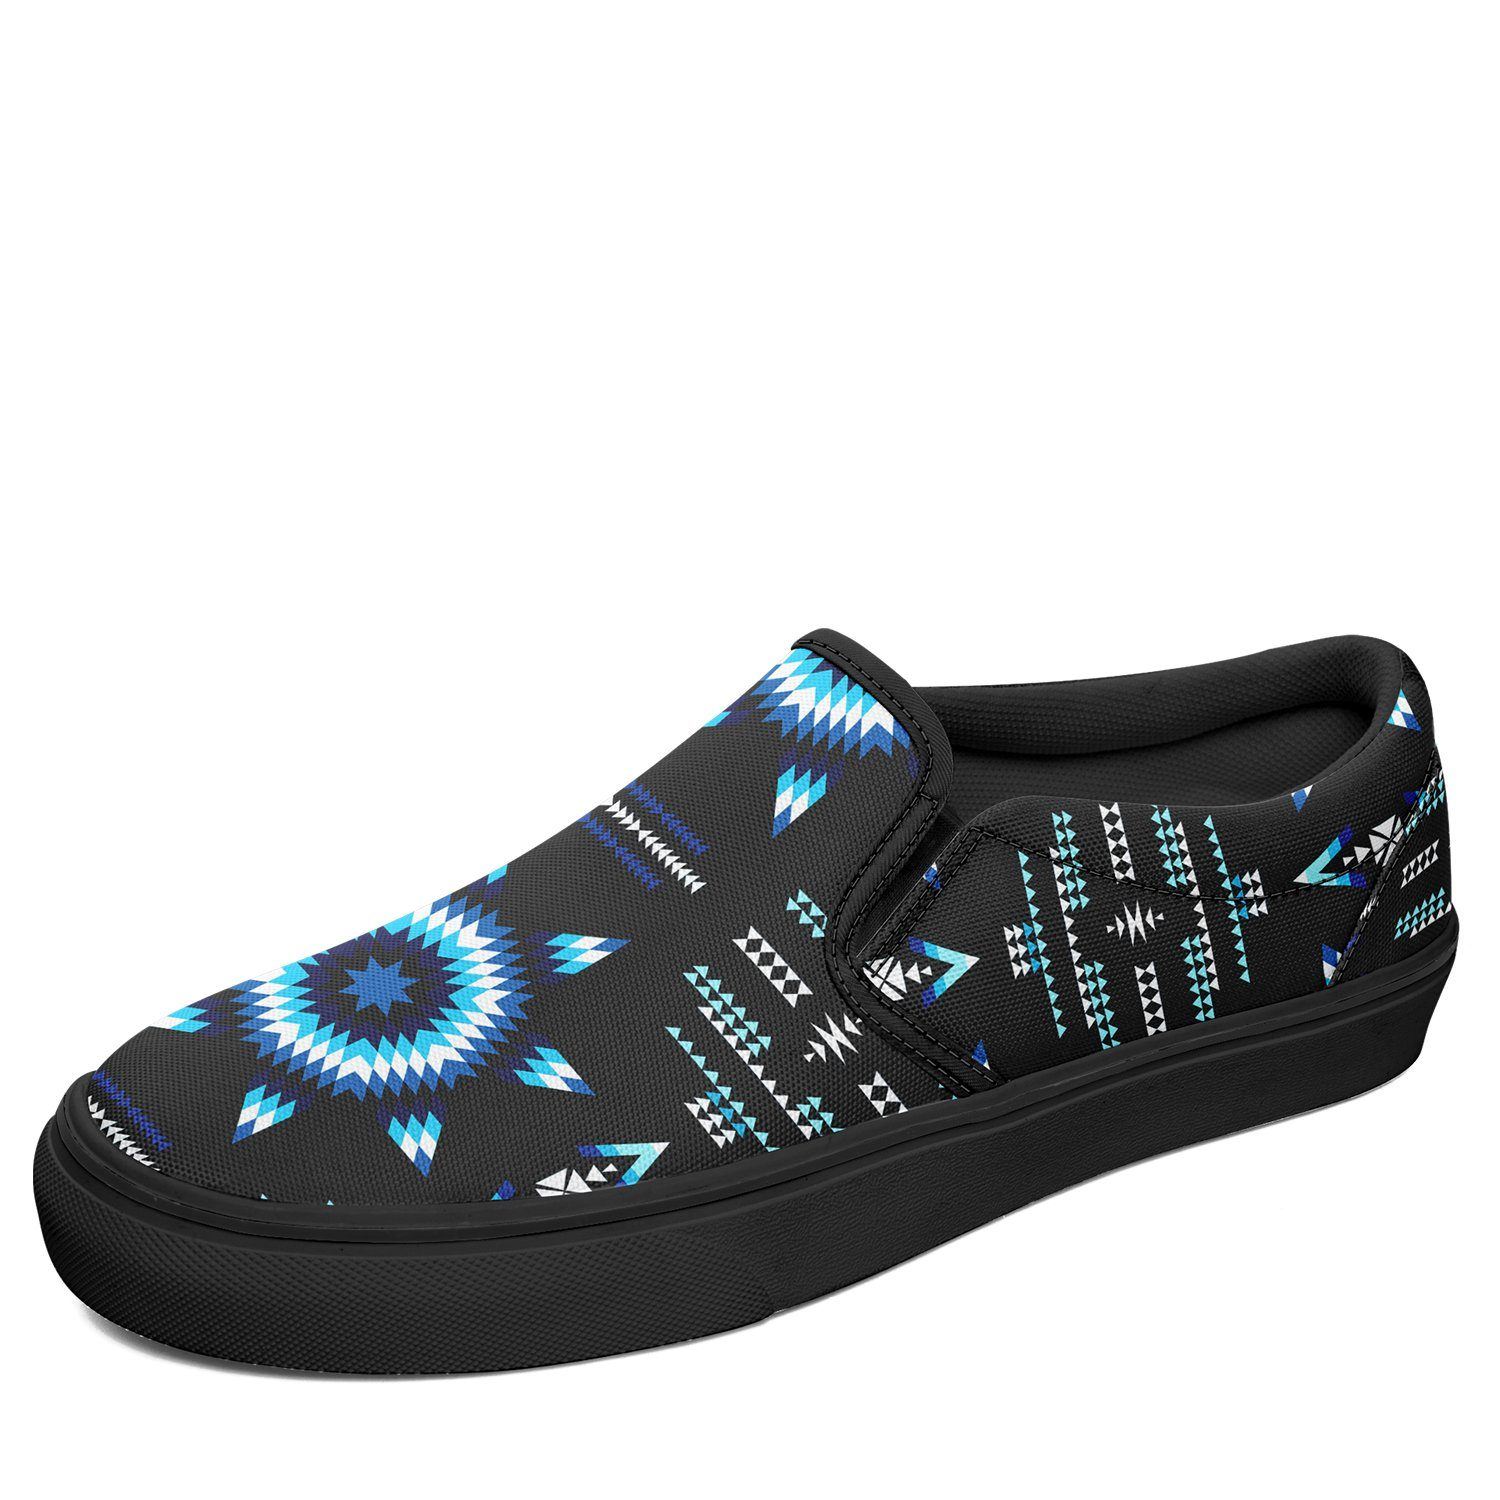 Rising Star Wolf Moon Otoyimm Kid's Canvas Slip On Shoes 49 Dzine US Youth 1 / EUR 32 Black Sole 